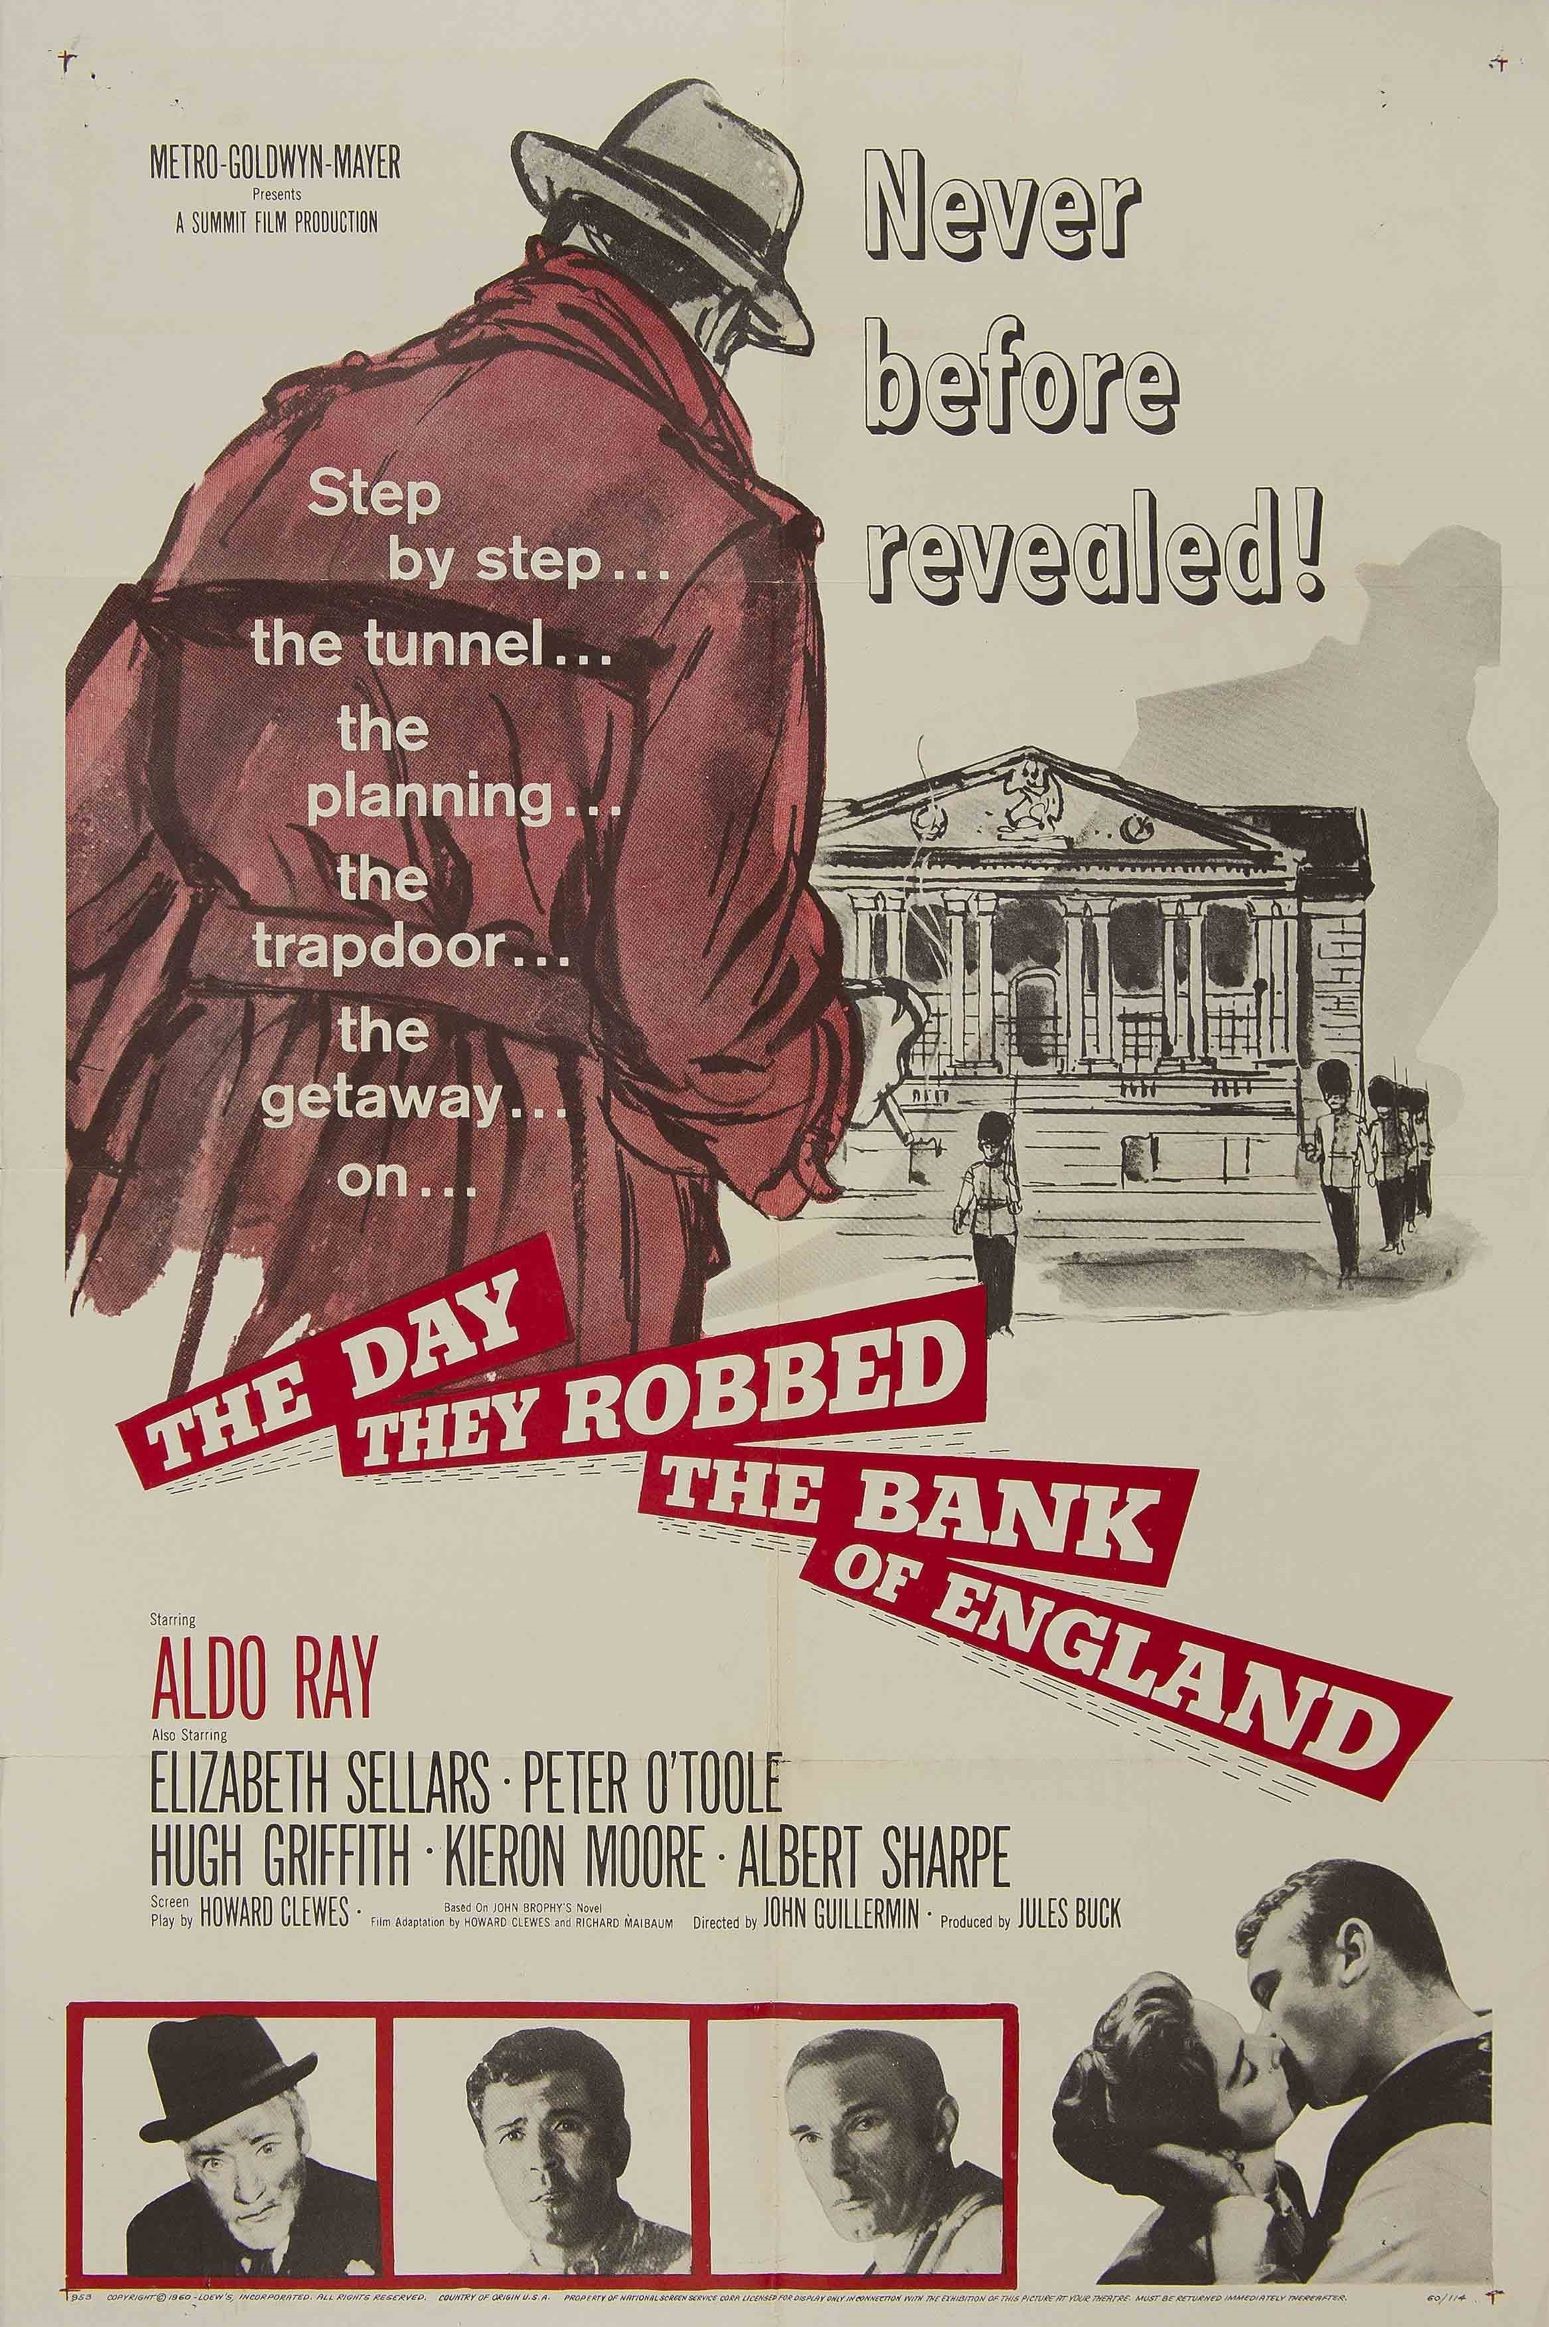 Bank in movies film poster for The Day They Robbed the Bank of England